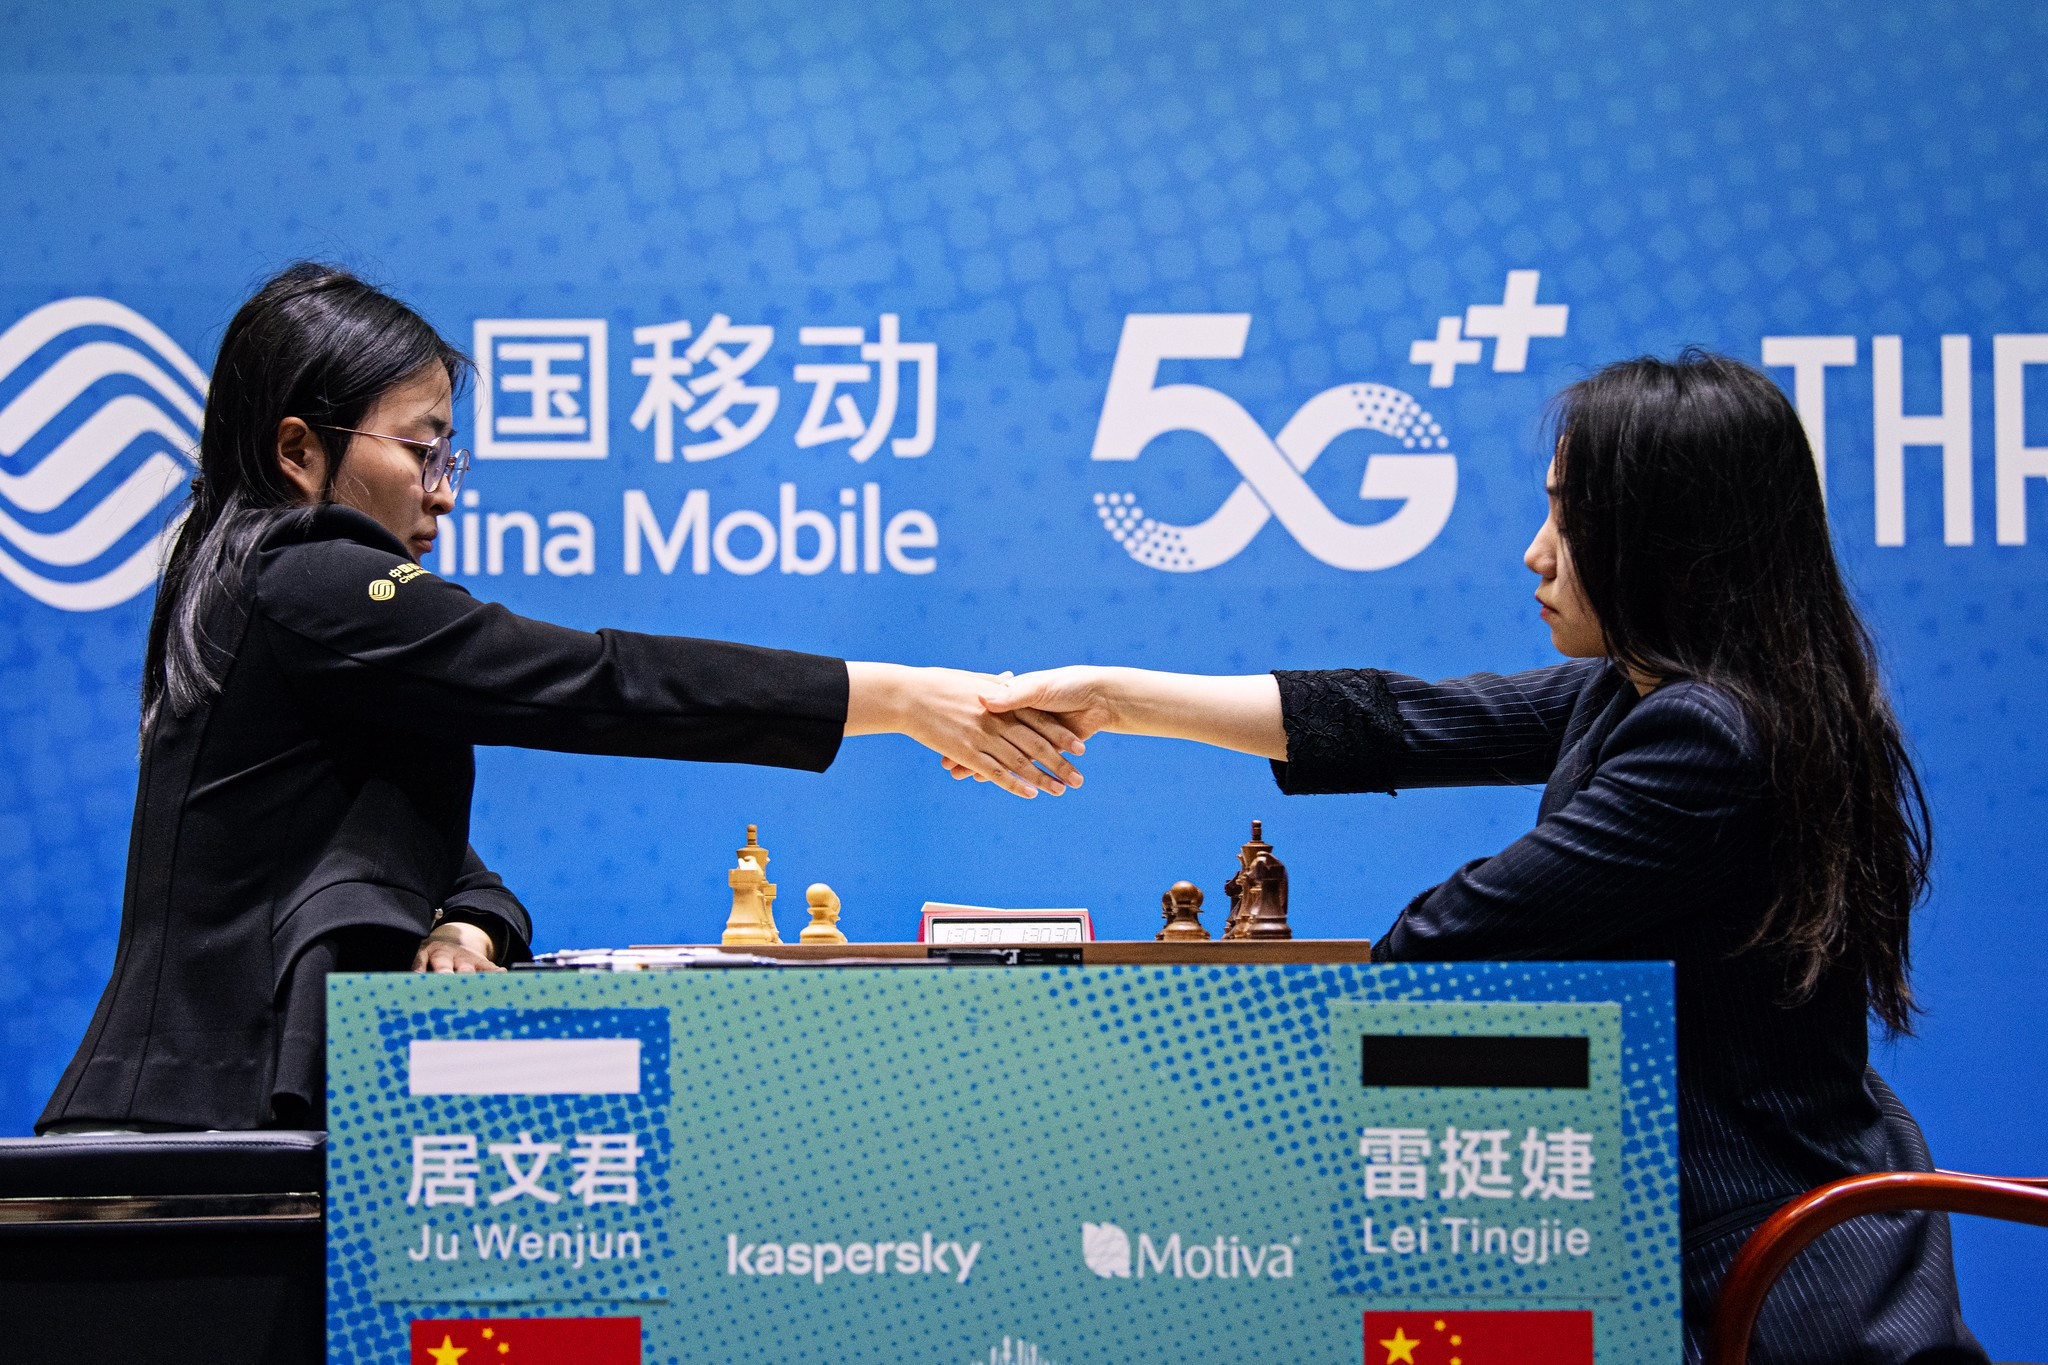 Lei takes initiative before game two of FIDE Women’s World Championship Match ends in draw